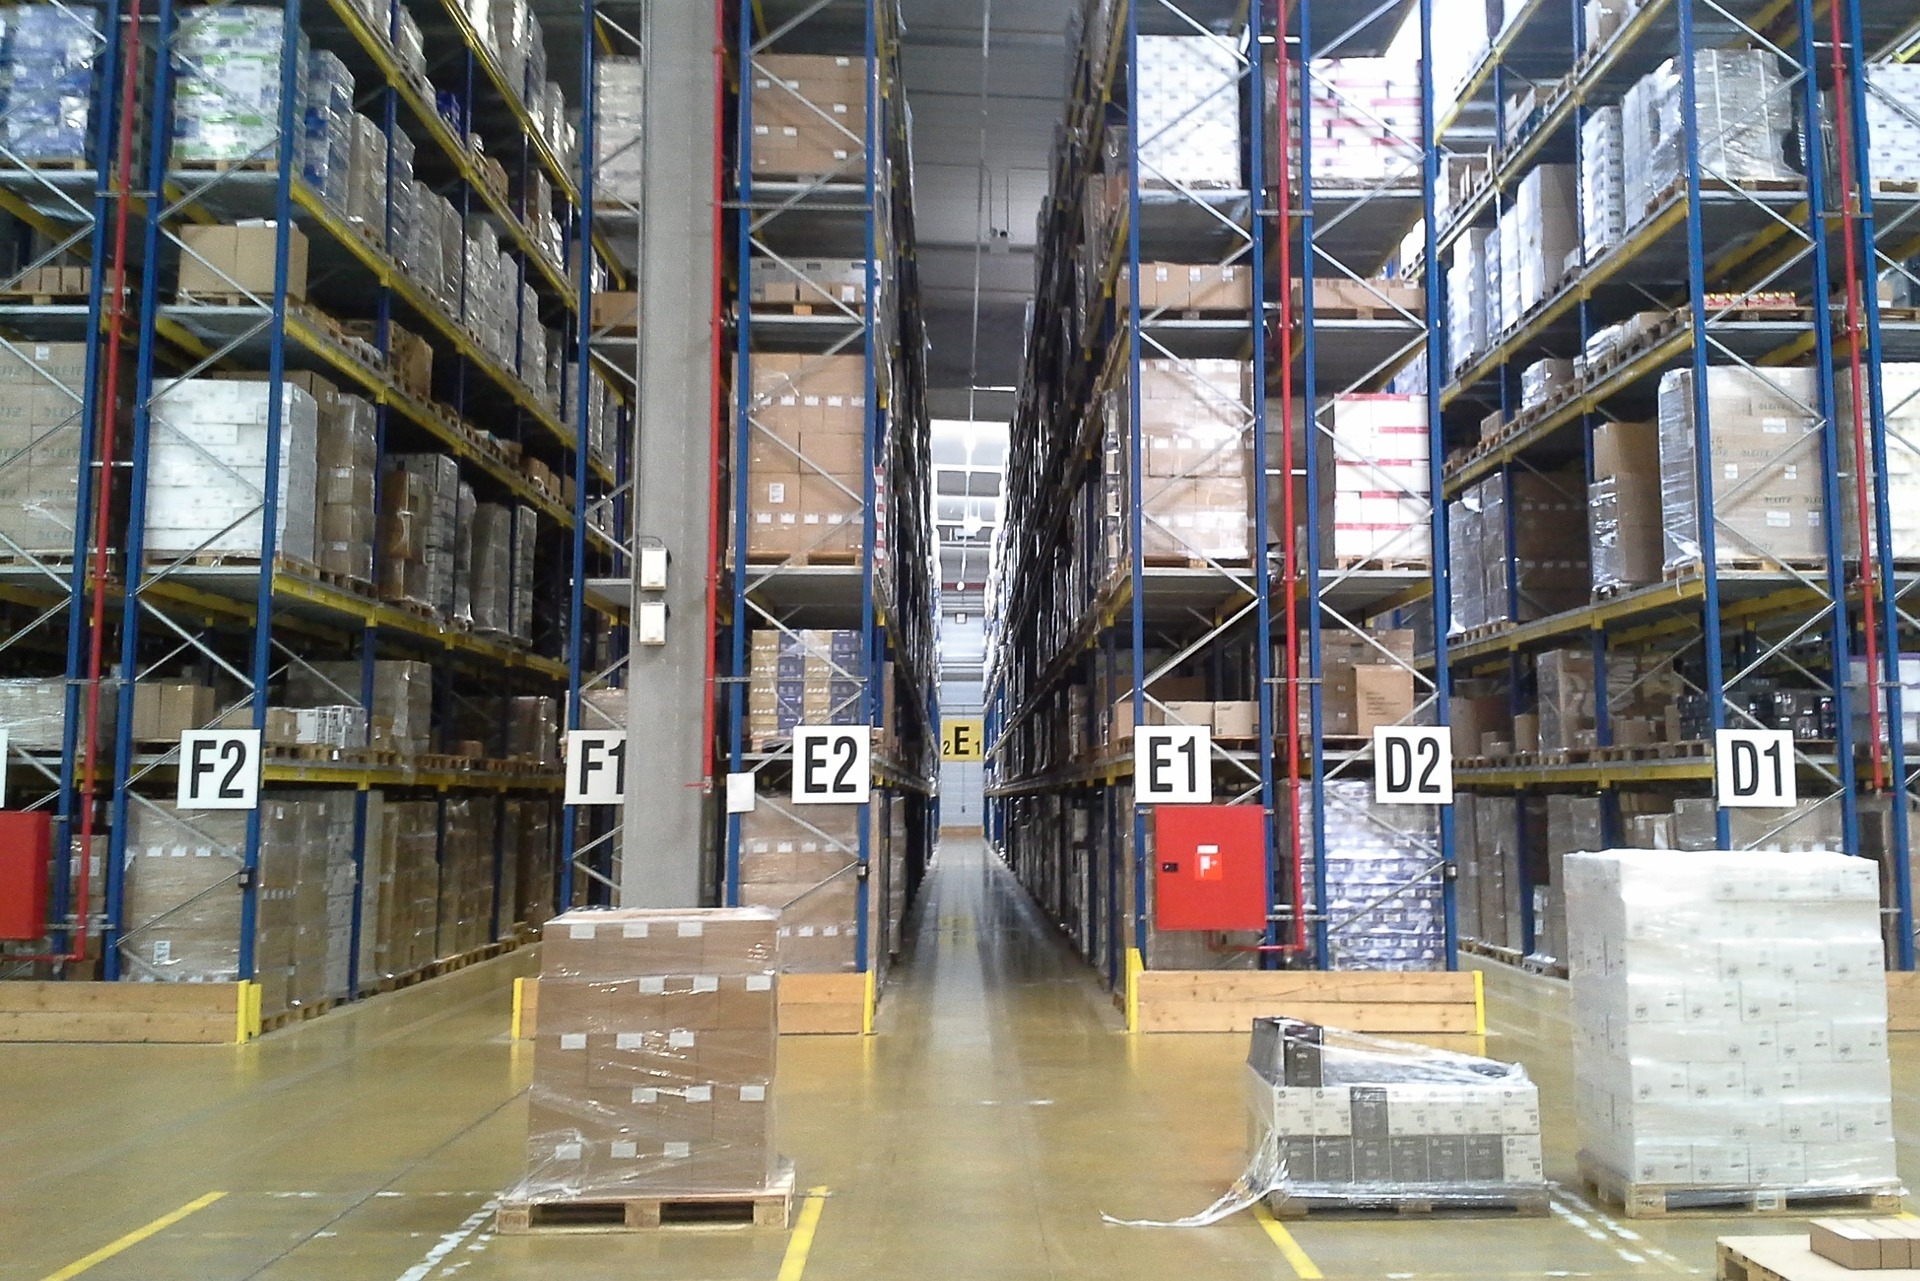 Full stockroom shelves in a warehouse with excess inventory